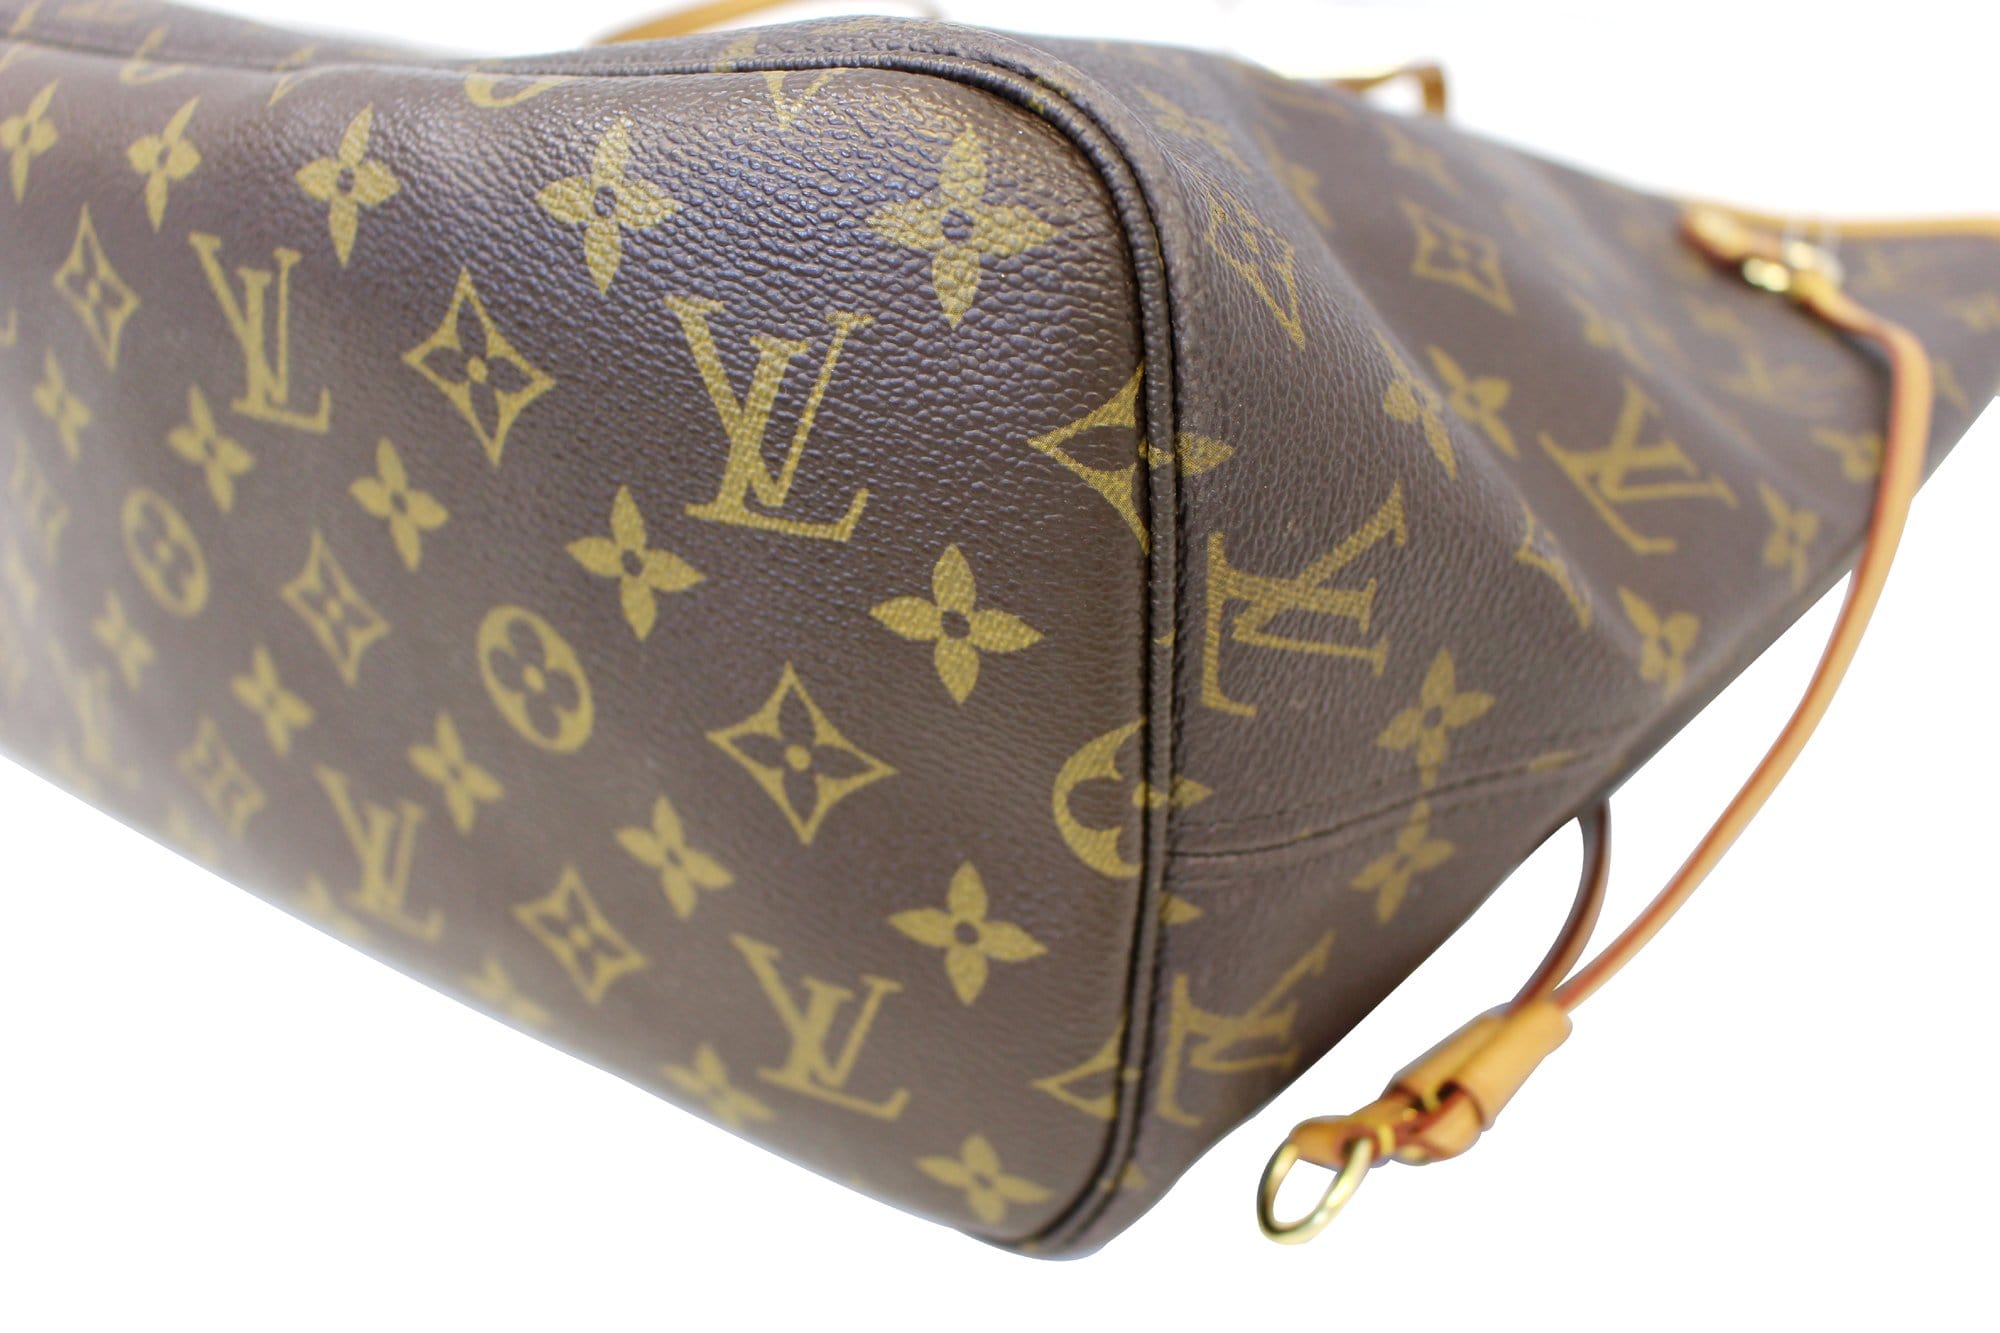 LOUIS VUITTON Large tote bag in Monogram canvas and na…